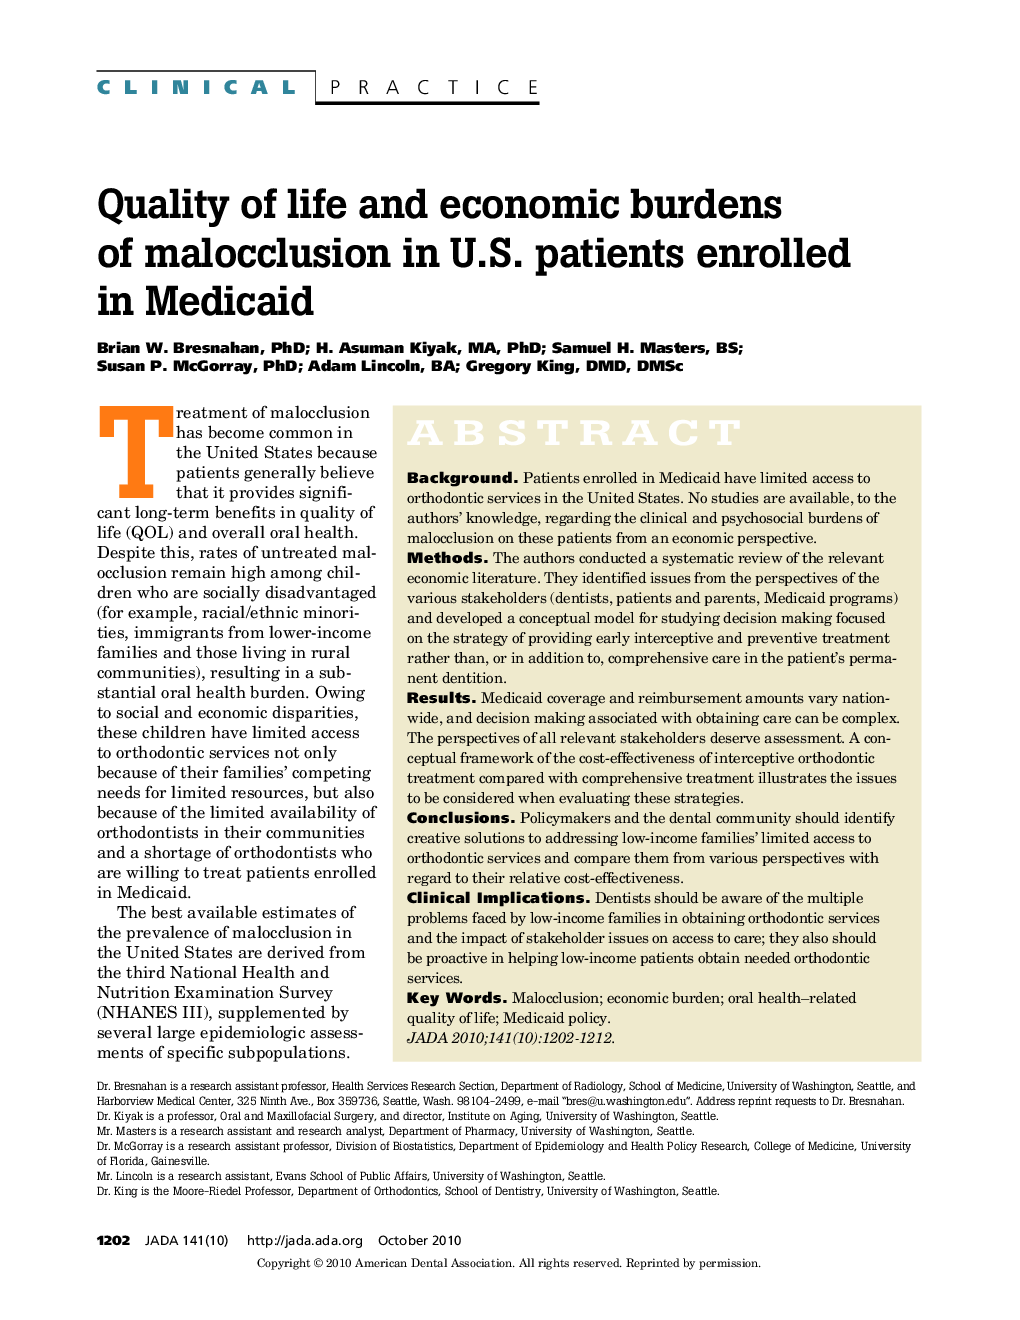 Quality of Life and Economic Burdens of Malocclusion in U.S. Patients Enrolled in Medicaid